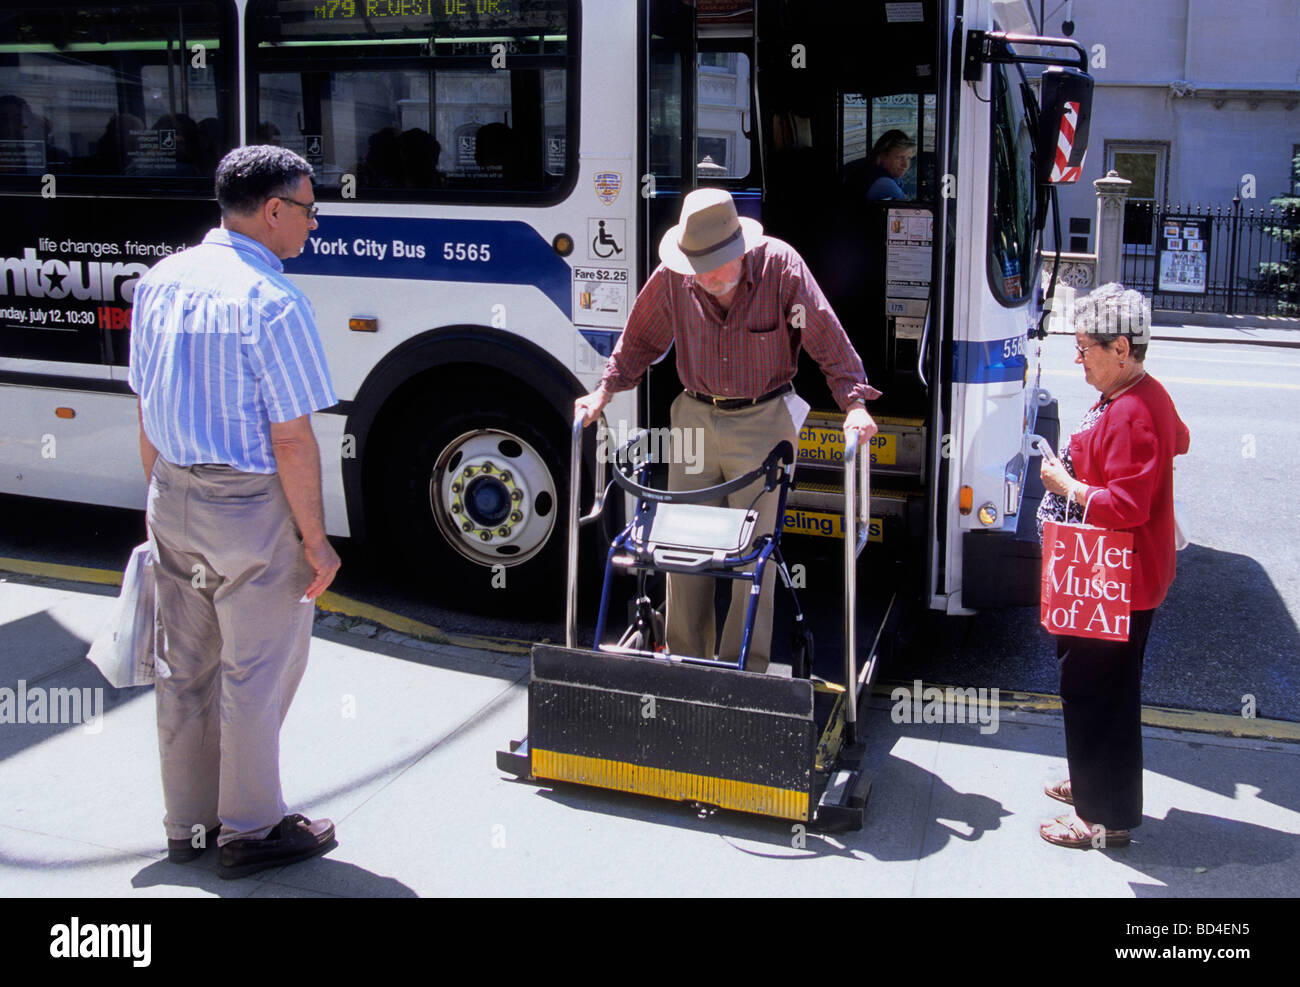 Disabled man getting off of a city bus using an orthopedic walker while socially distant pedestrians waiting to get on the bus watch Stock Photo